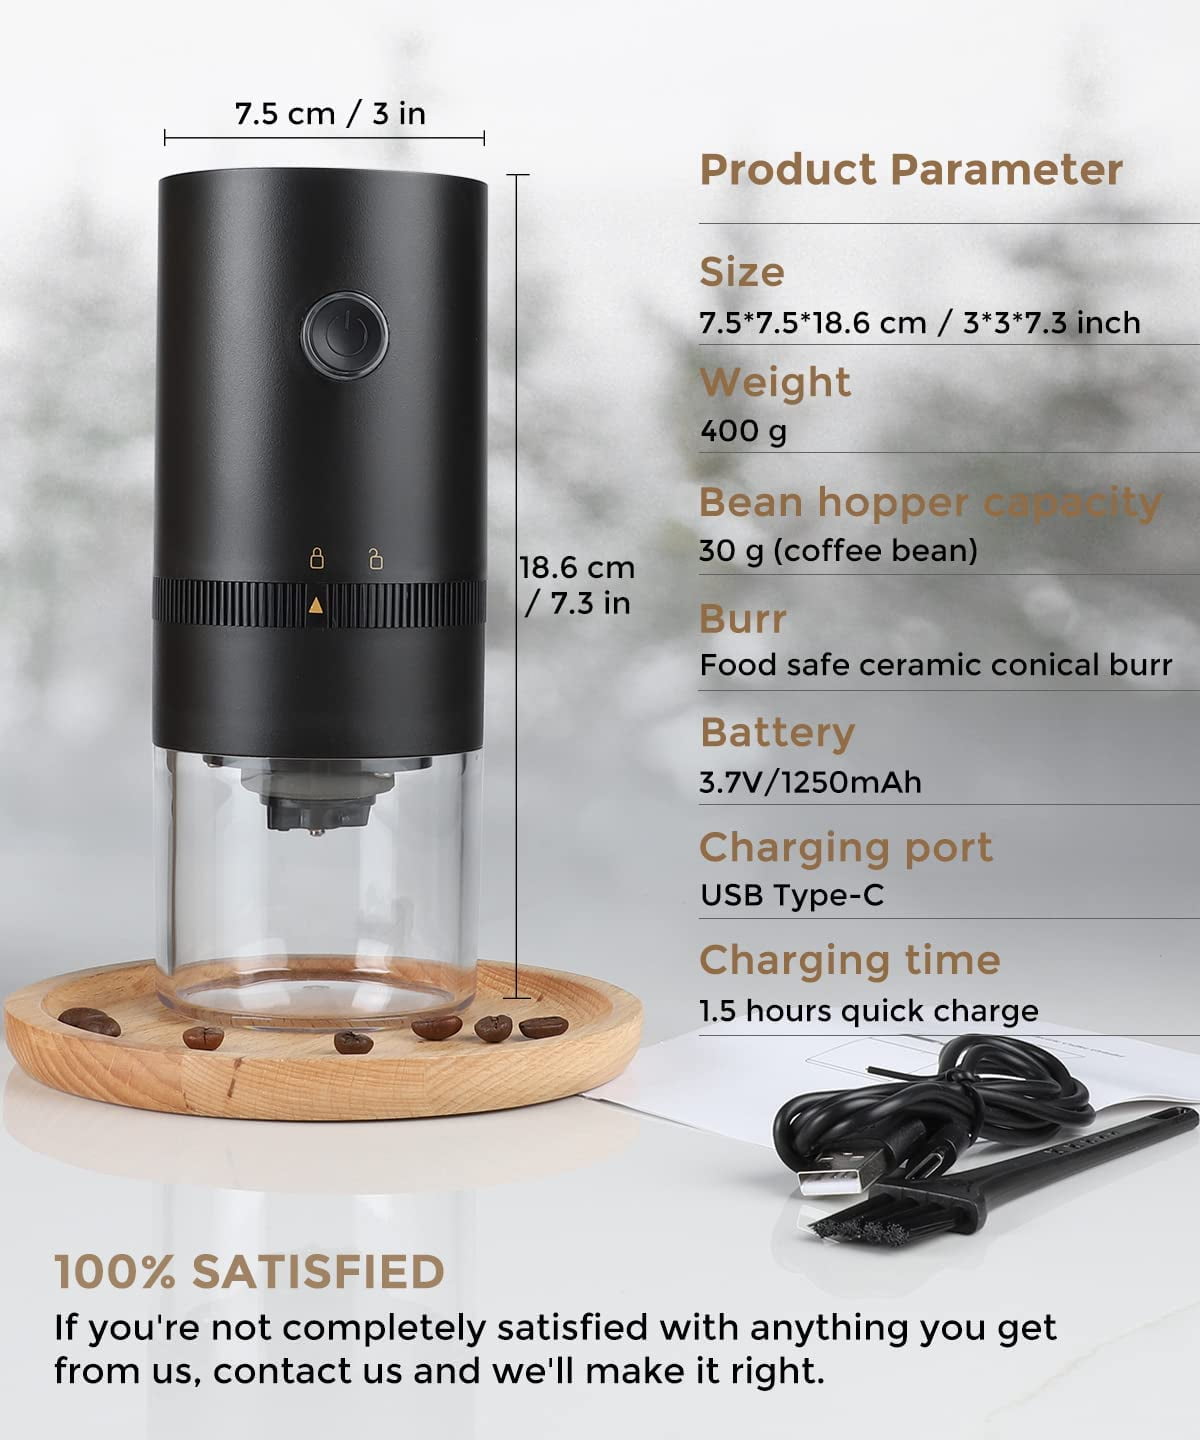  Portable Automatic Coffee Grinder Small Multi-function Coffee  Grinders Quiet Spice Grinder One Touch Push-Button Control Electric Coffee  Grinder with Removable Chamber (Color : Brown) : Home & Kitchen